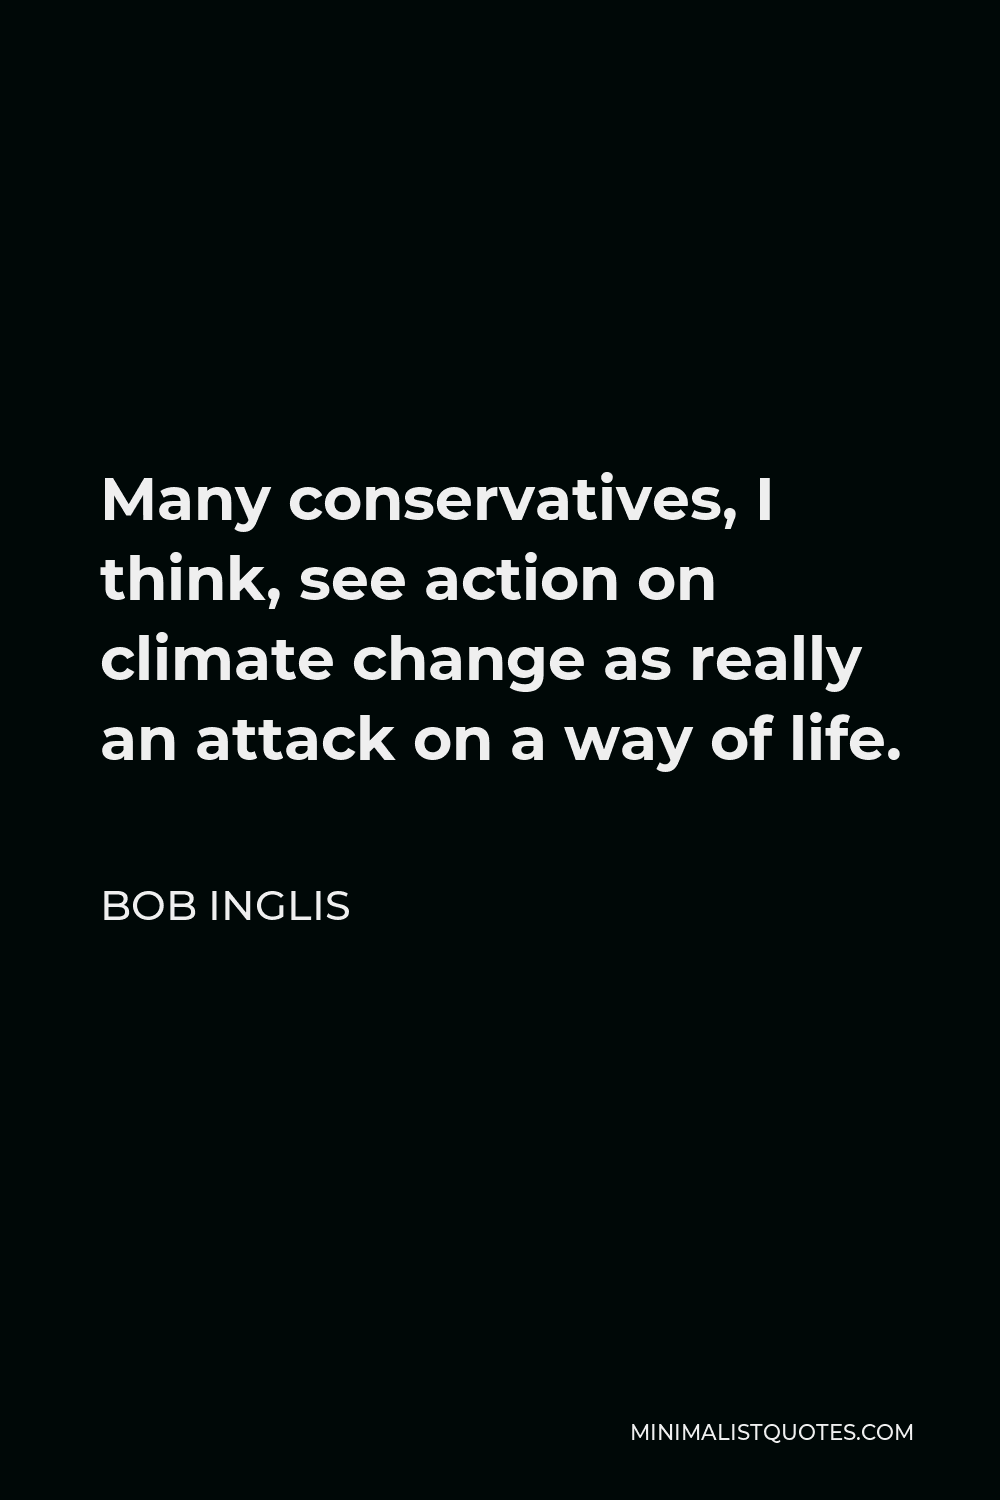 Bob Inglis Quote - Many conservatives, I think, see action on climate change as really an attack on a way of life.